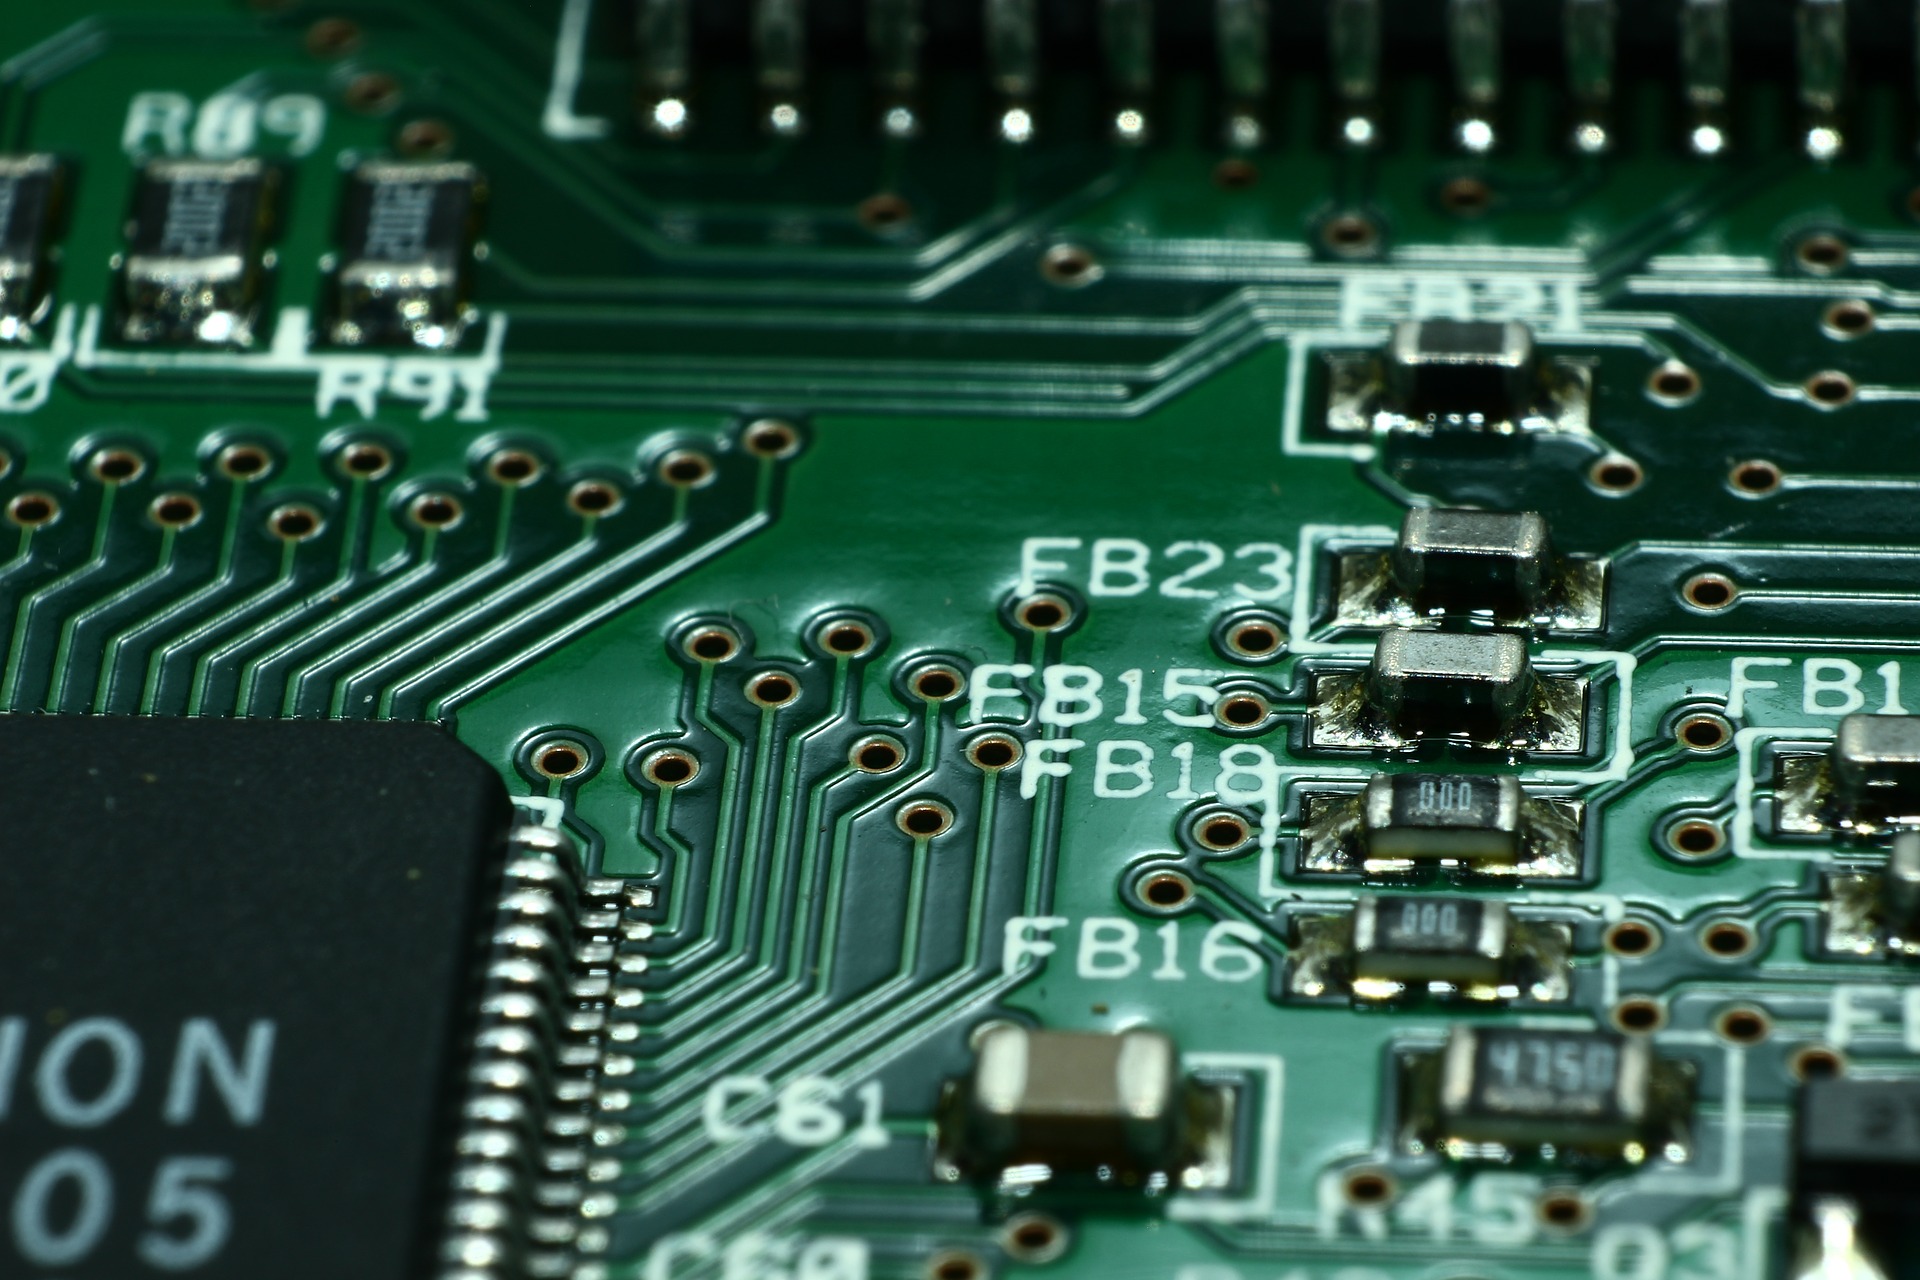 How Does A Computer Circuit Board Work?